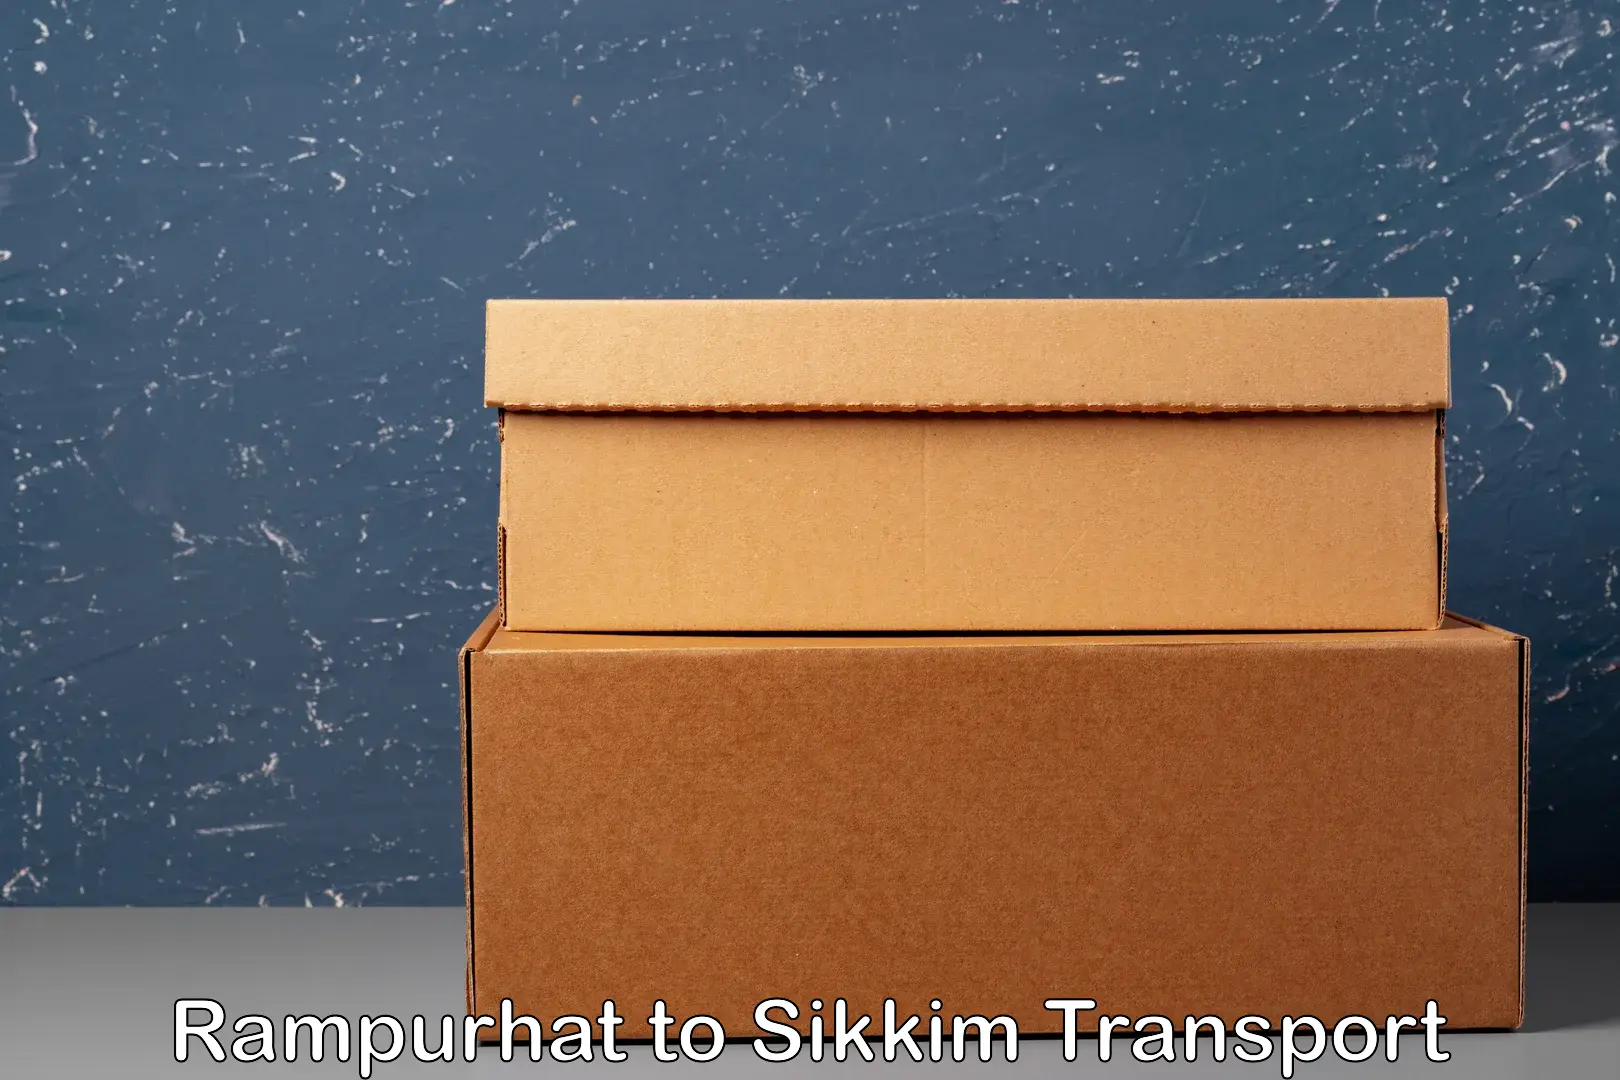 Daily transport service Rampurhat to Sikkim